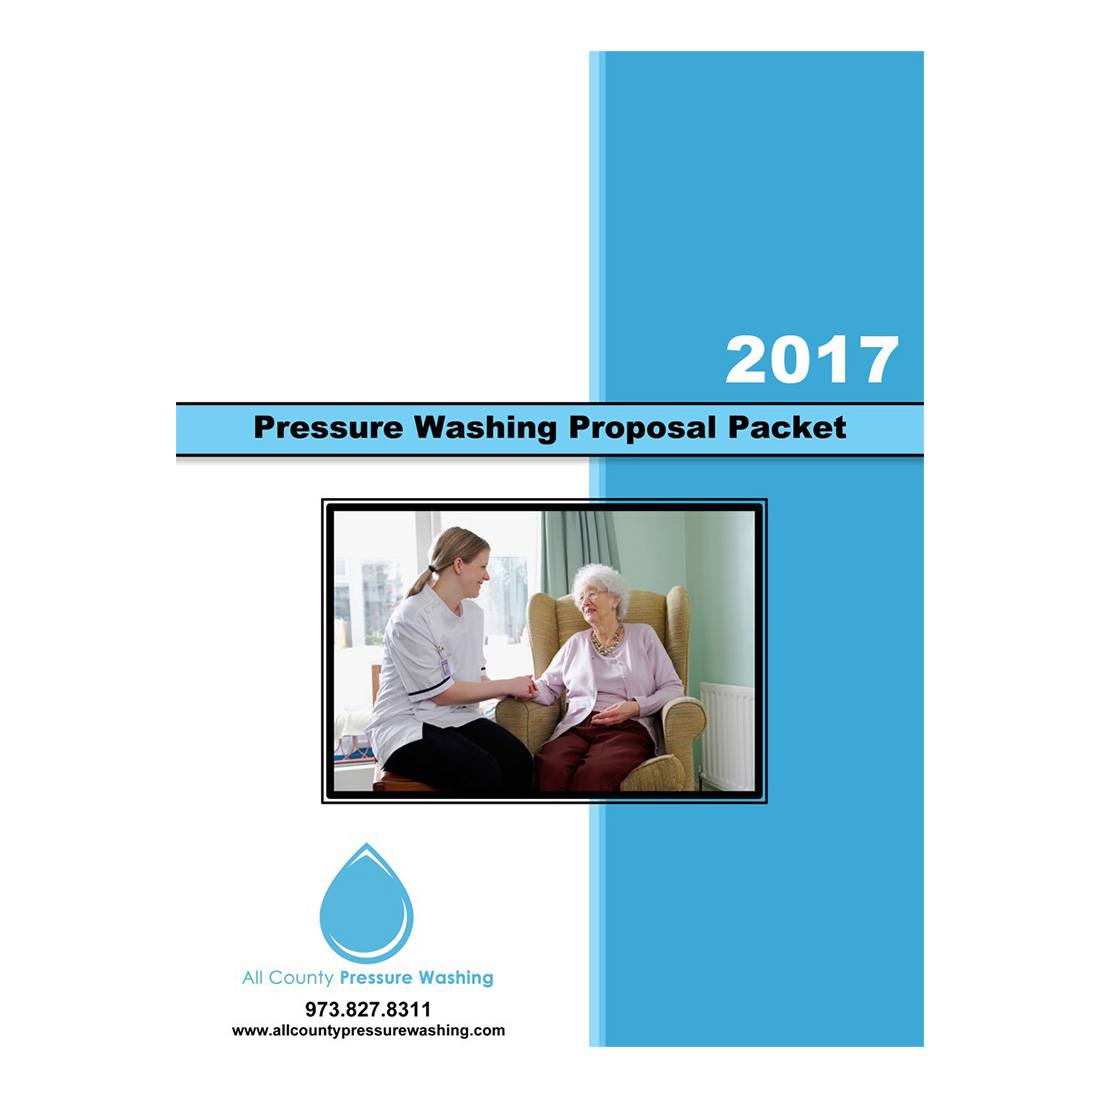 Hospital Proposal - Pressure Washing Proposal Packet - Front View